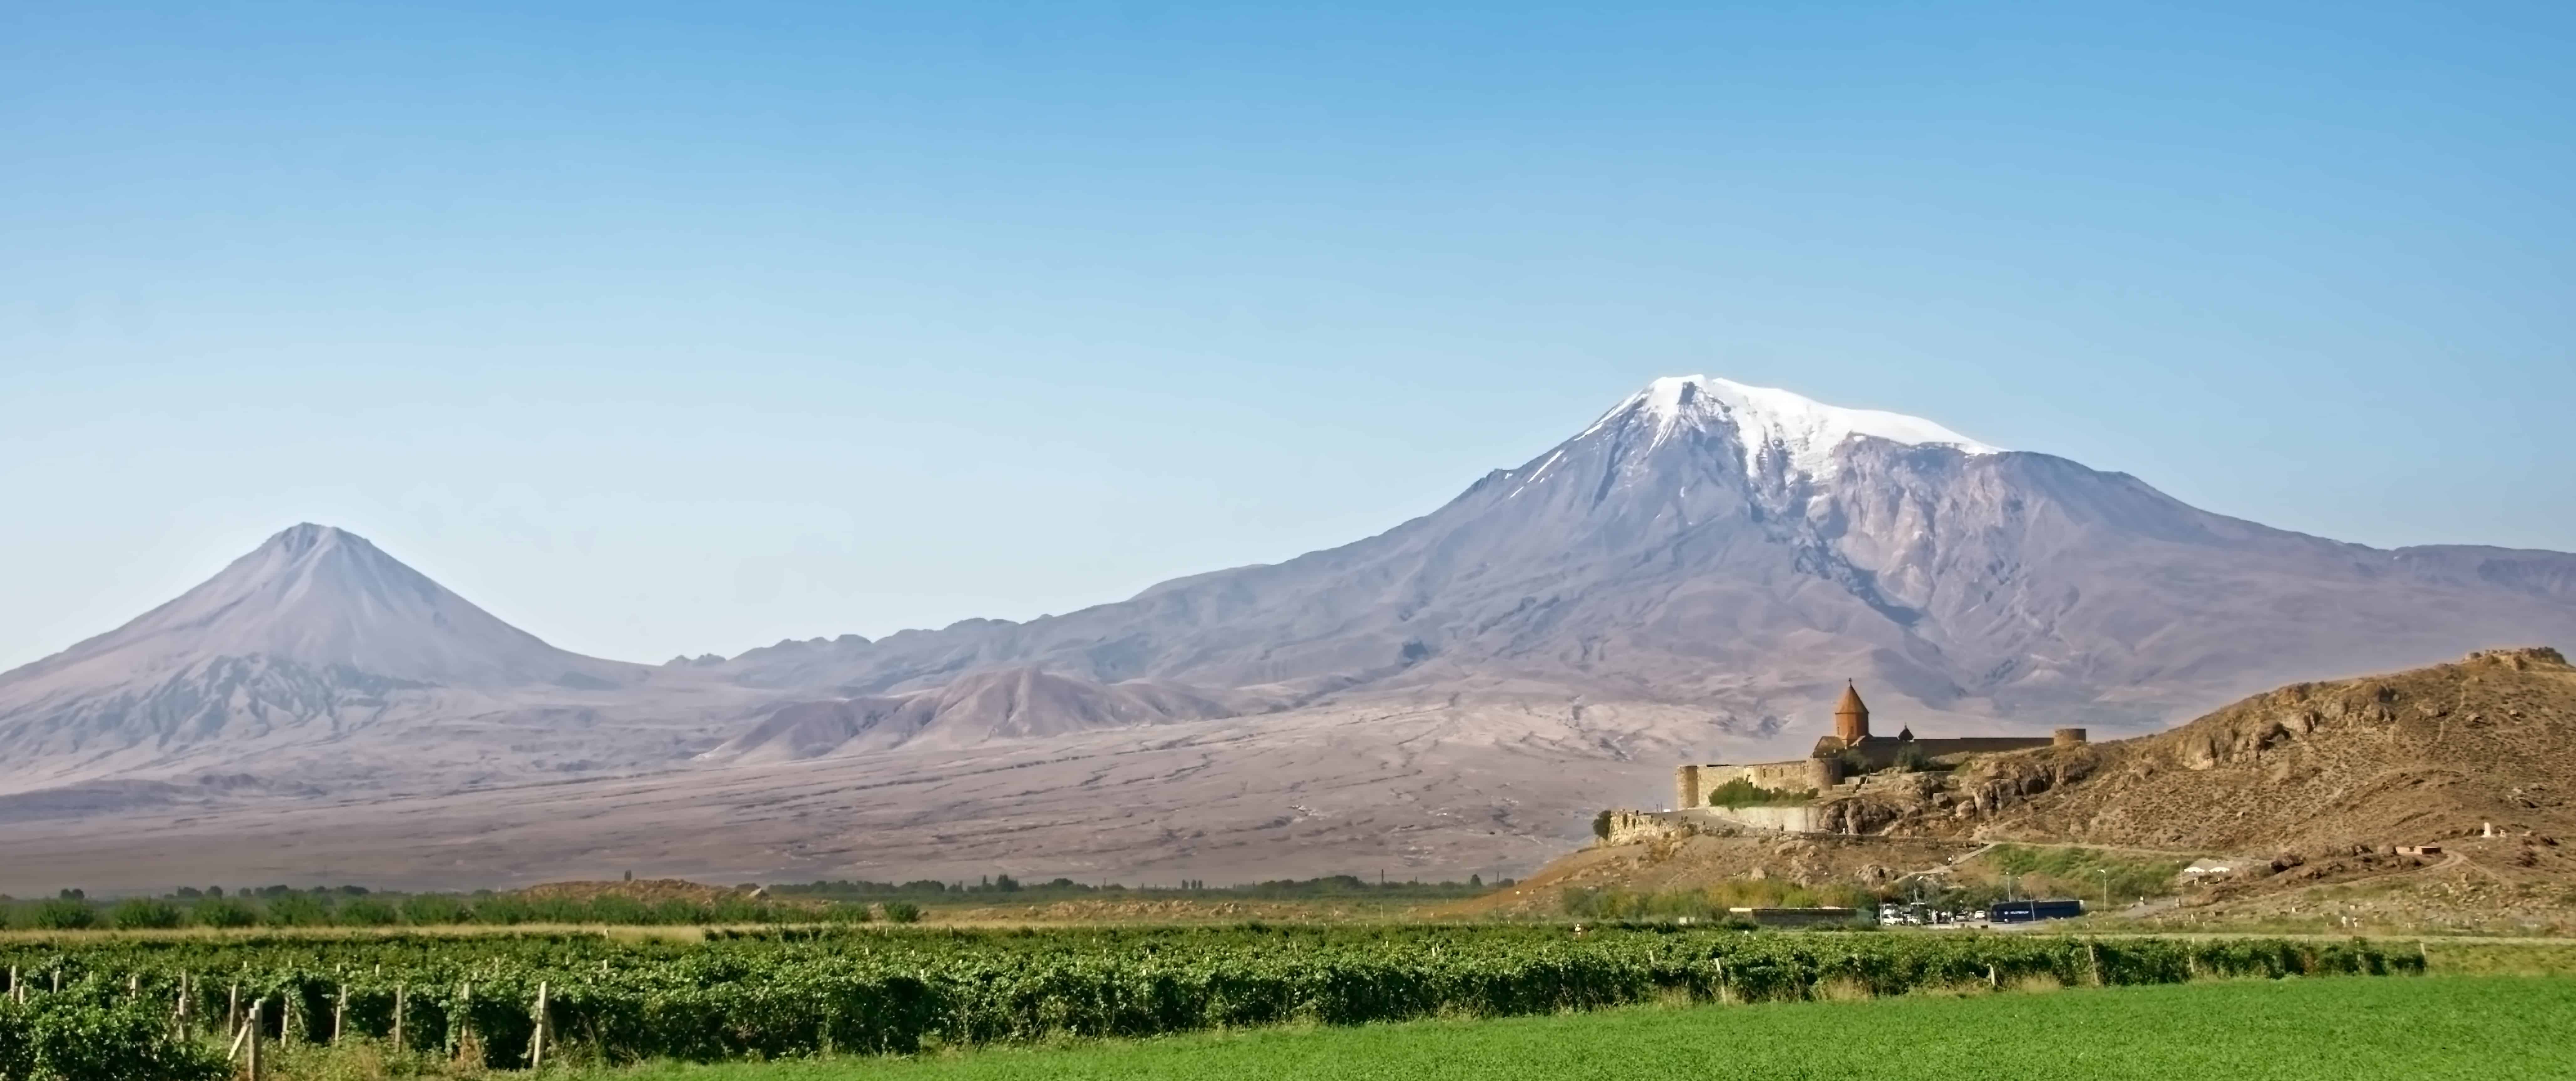 Sweeping landscape with vineyards, a monastery, and mountain in the background in Armenia